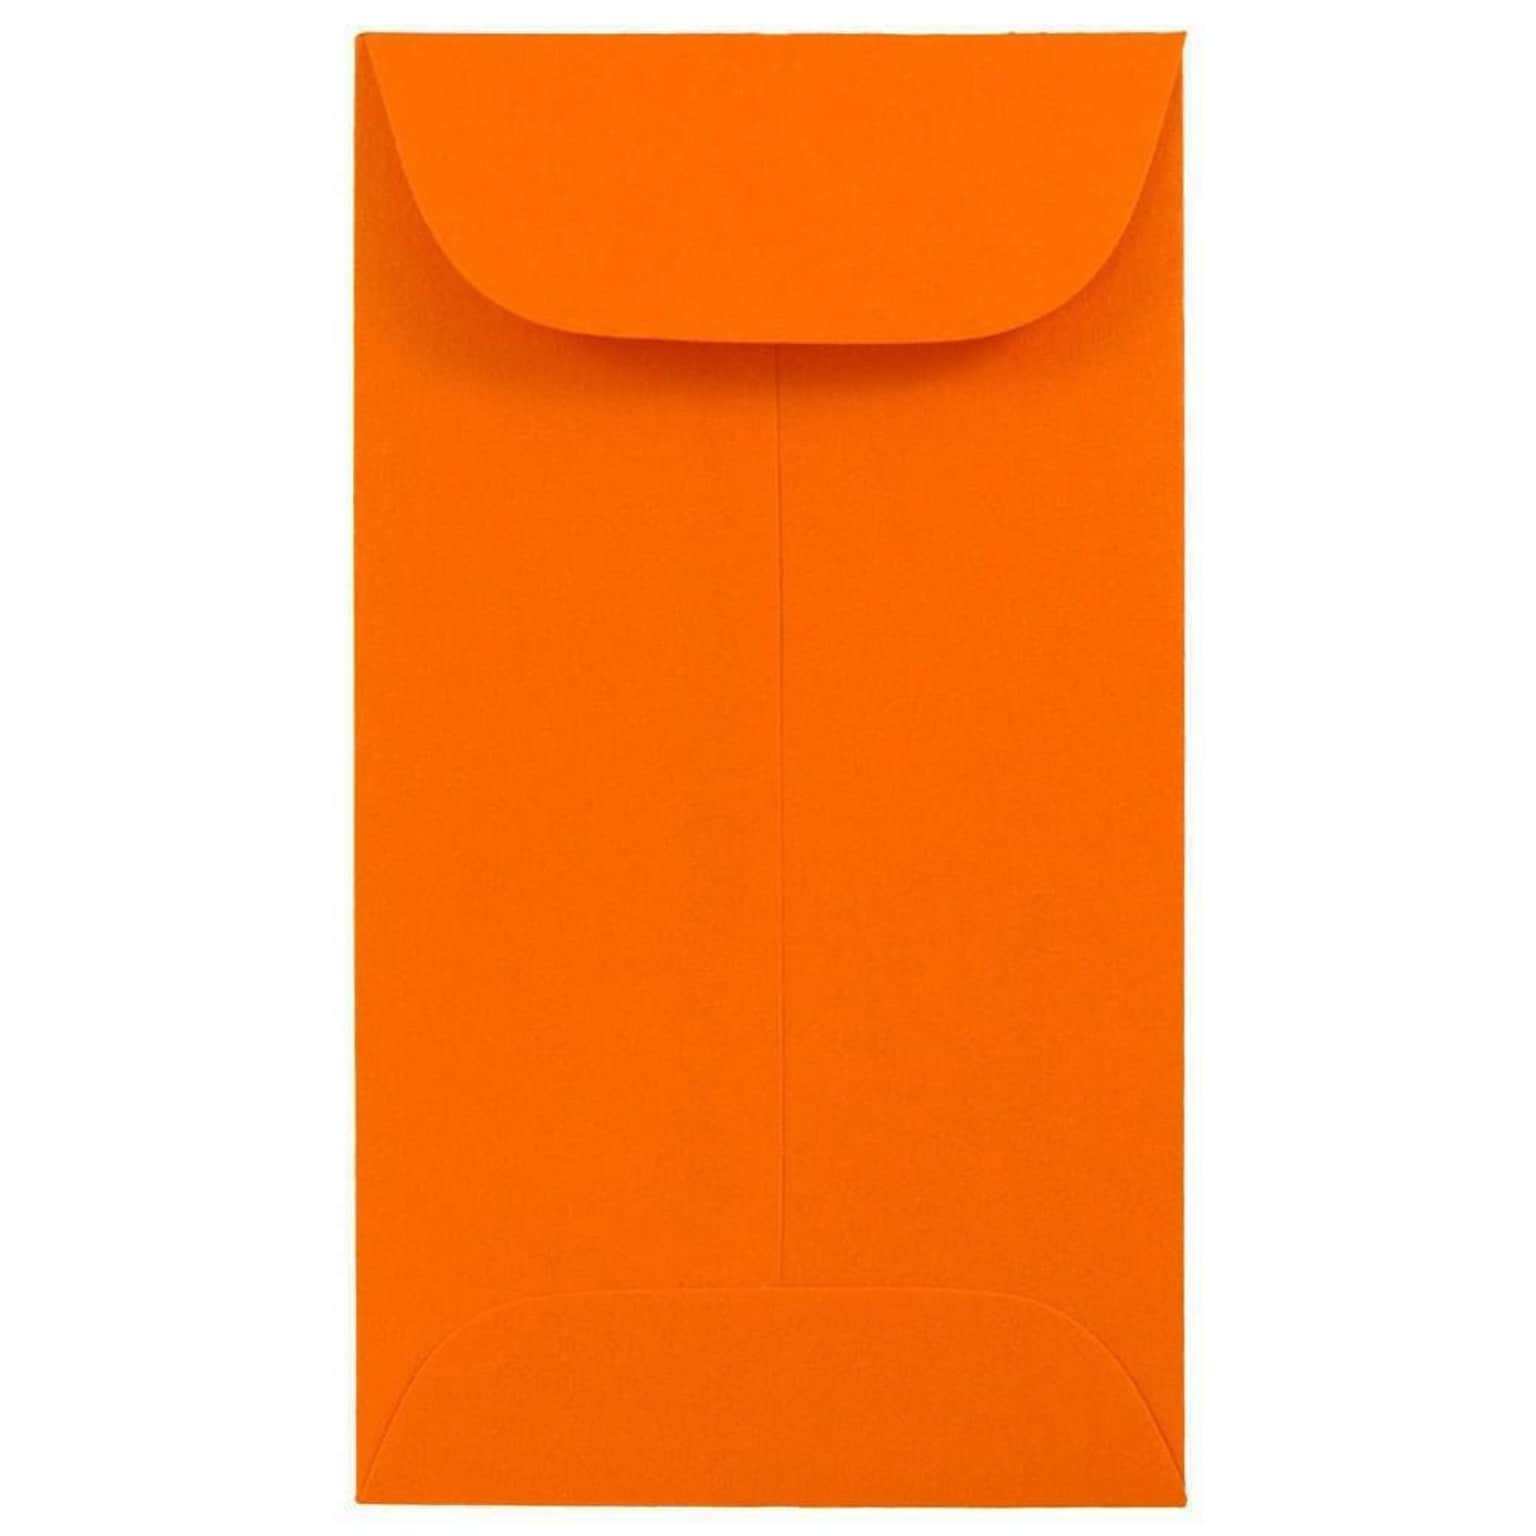 JAM Paper #6 Coin Business Colored Envelopes, 3.375 x 6, Orange Recycled, 100/Pack (356730558B)